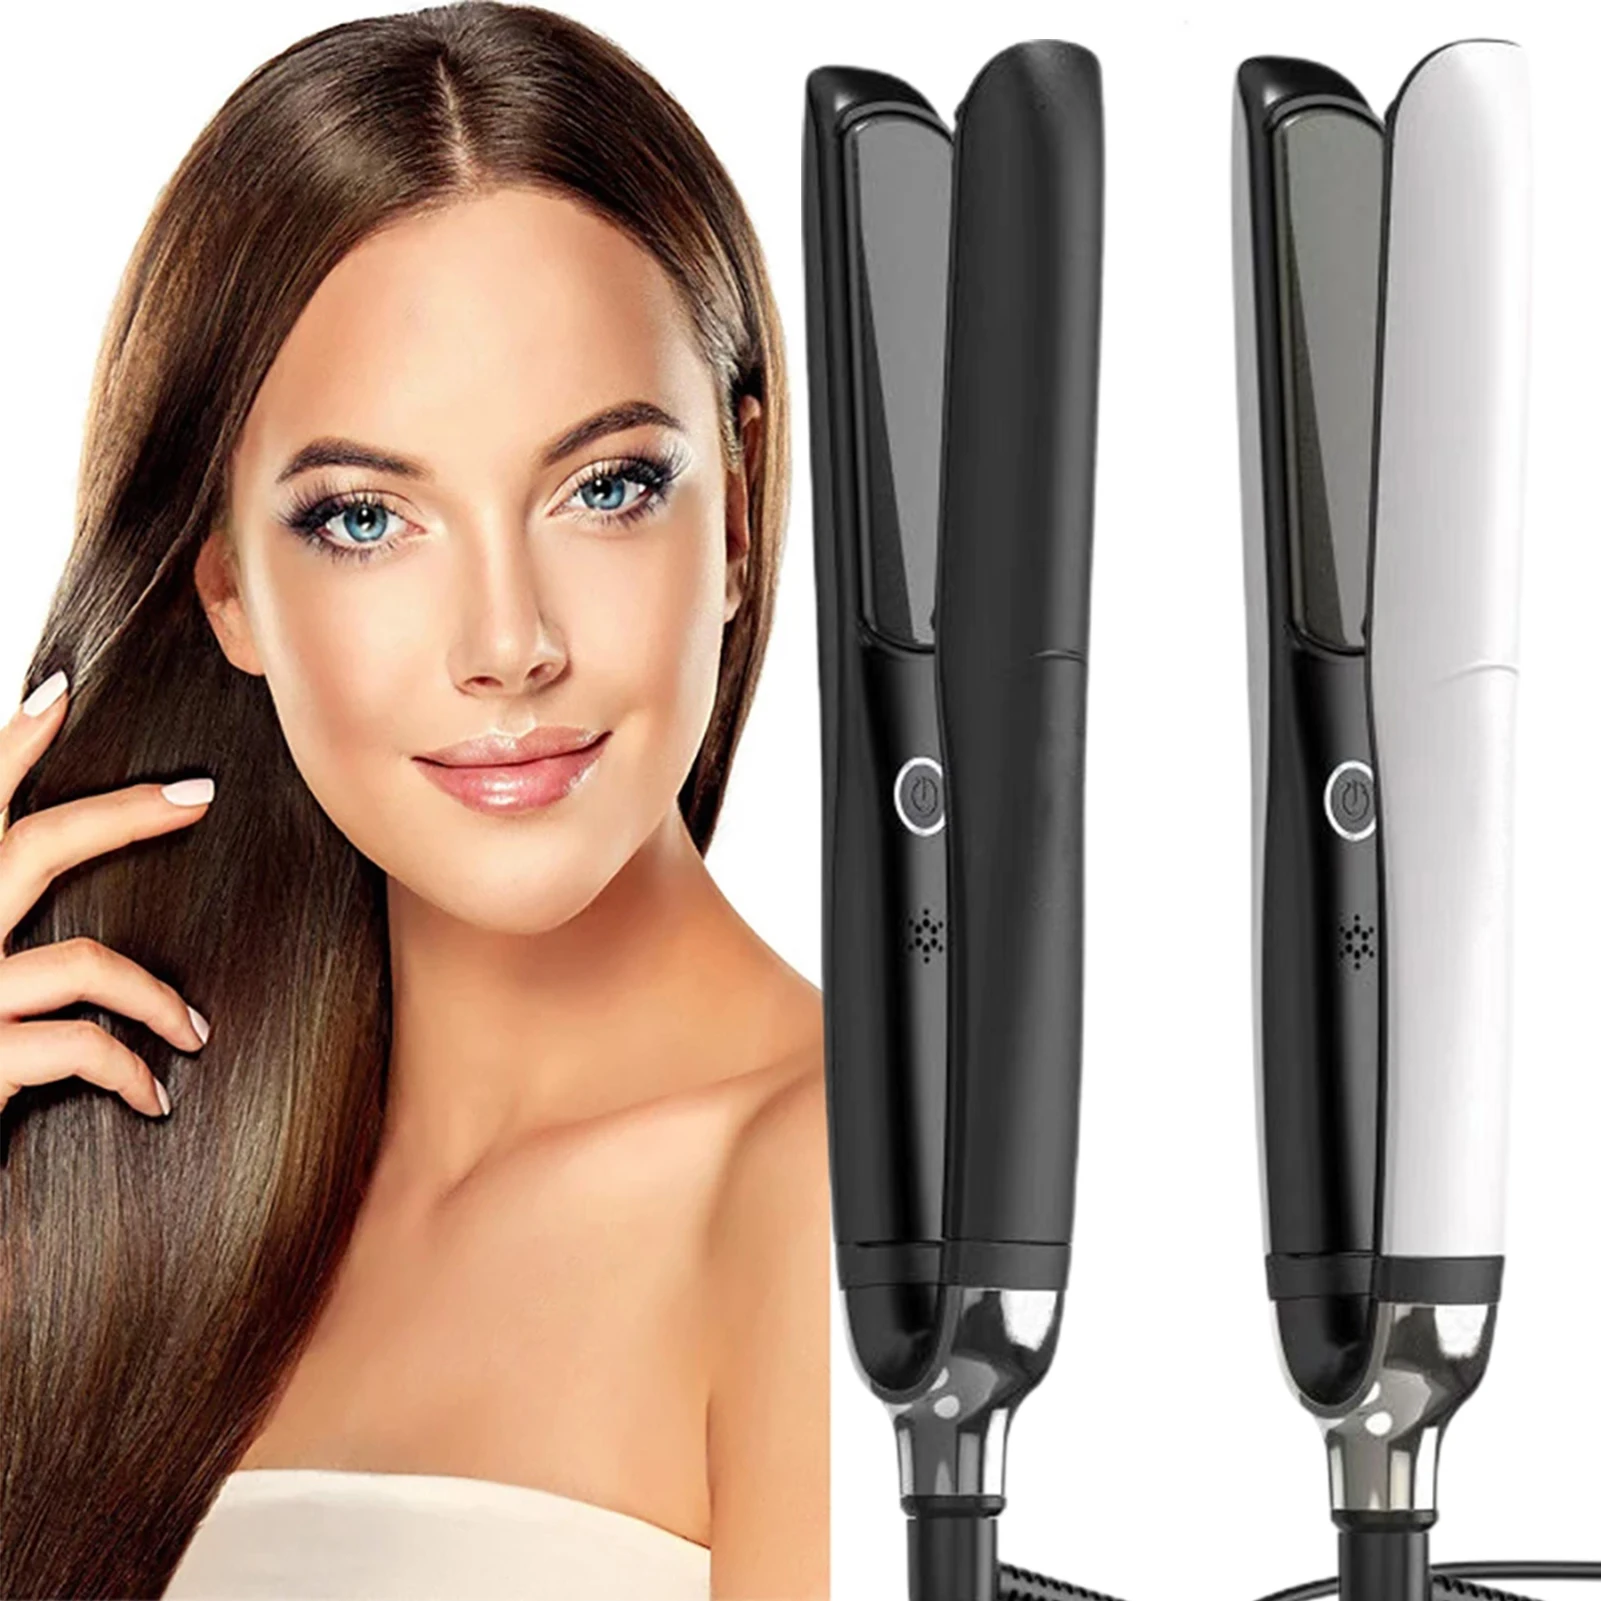 New 2 in 1 Hair Styler Heats Up Fast Hair Straightener and Curler No Hair Damage for All Hair Types Hair Styling Products